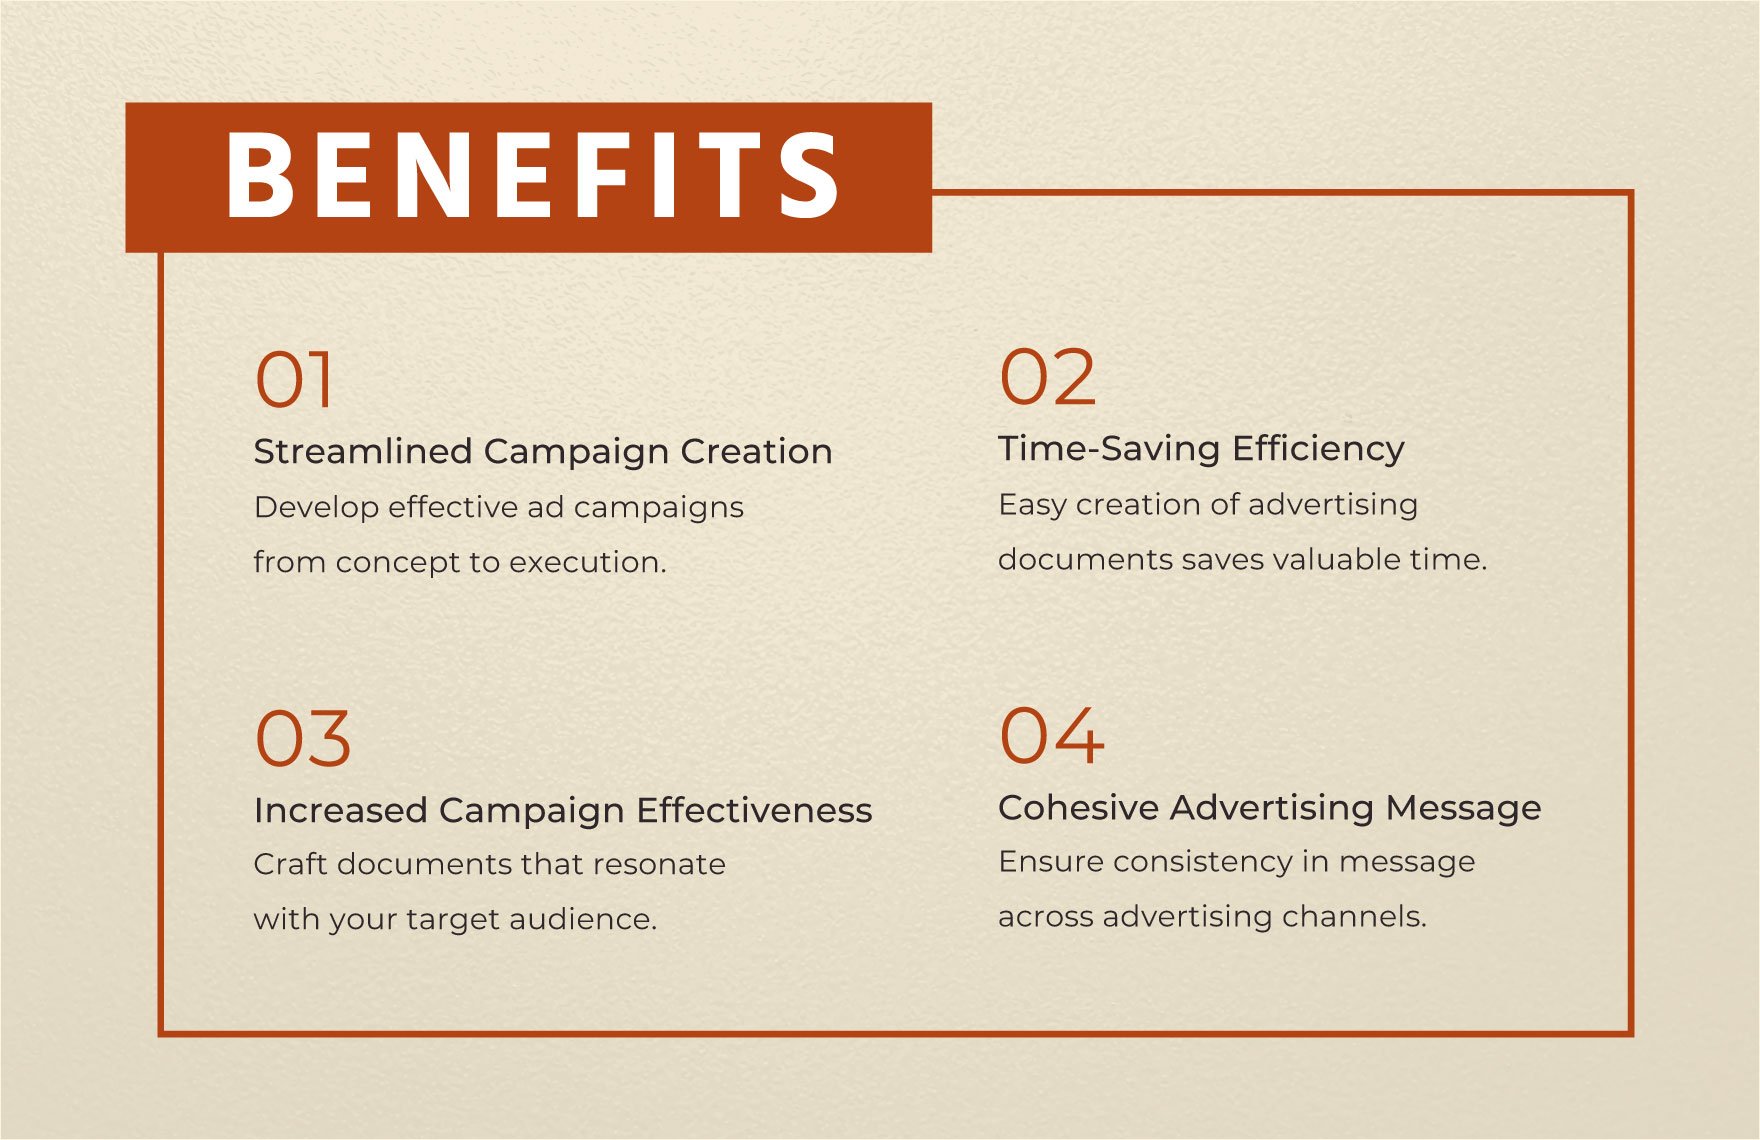 Advertising Campaign Brief Outline Template